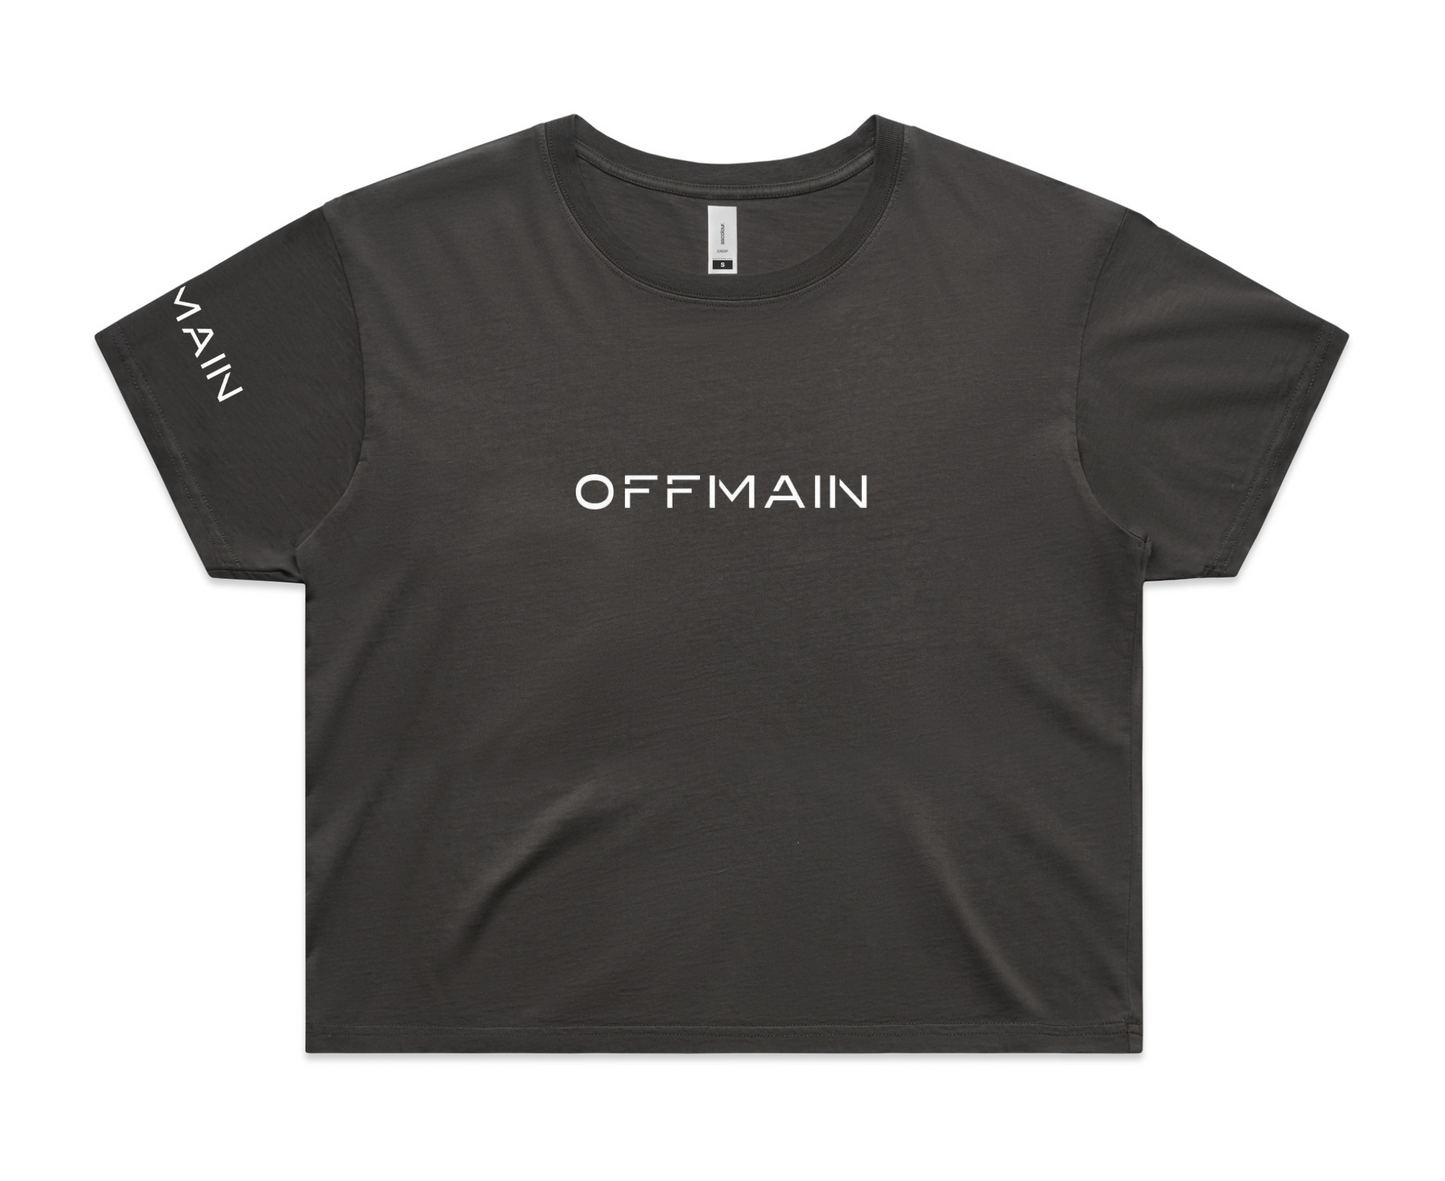 OFFMAIN Cropped Tee - Charcoal